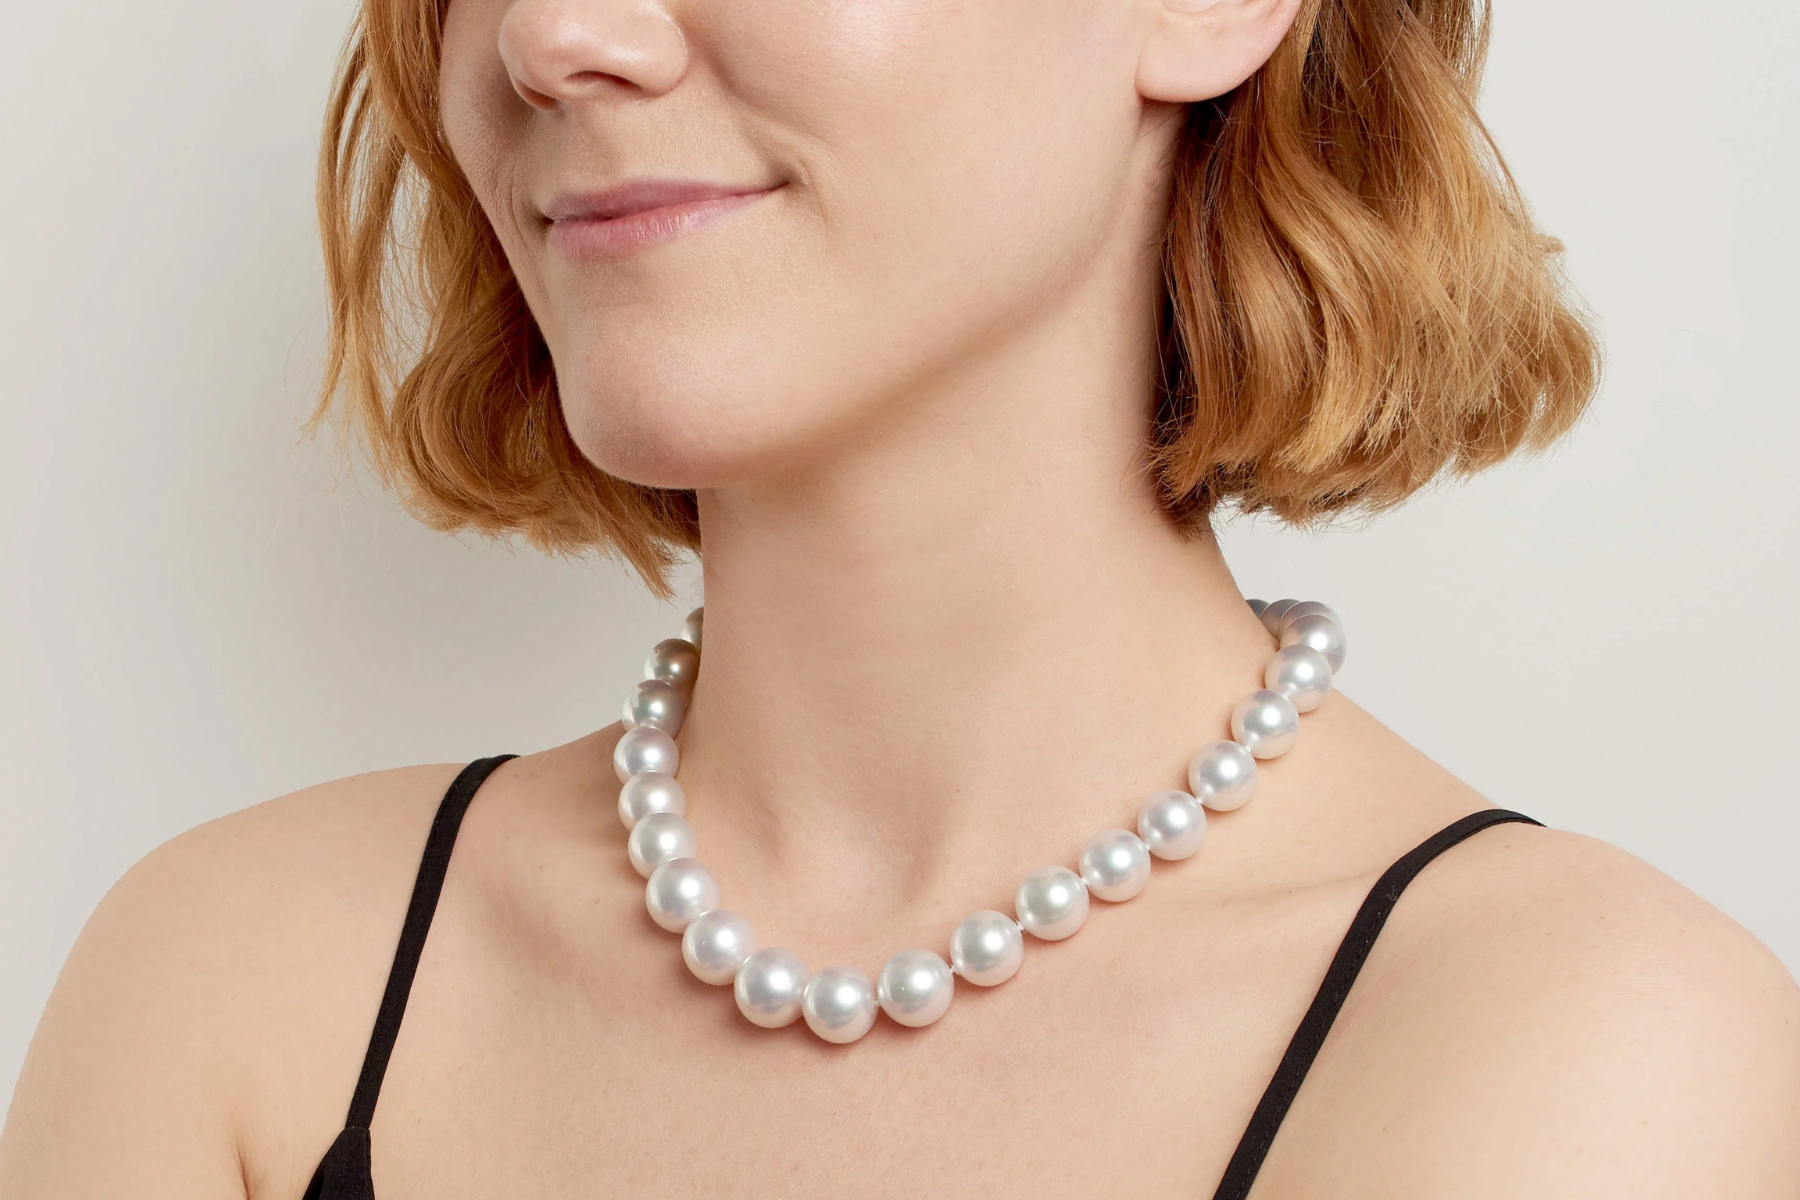 An image of an Pearl necklace being worn by a woman in a close-up shot